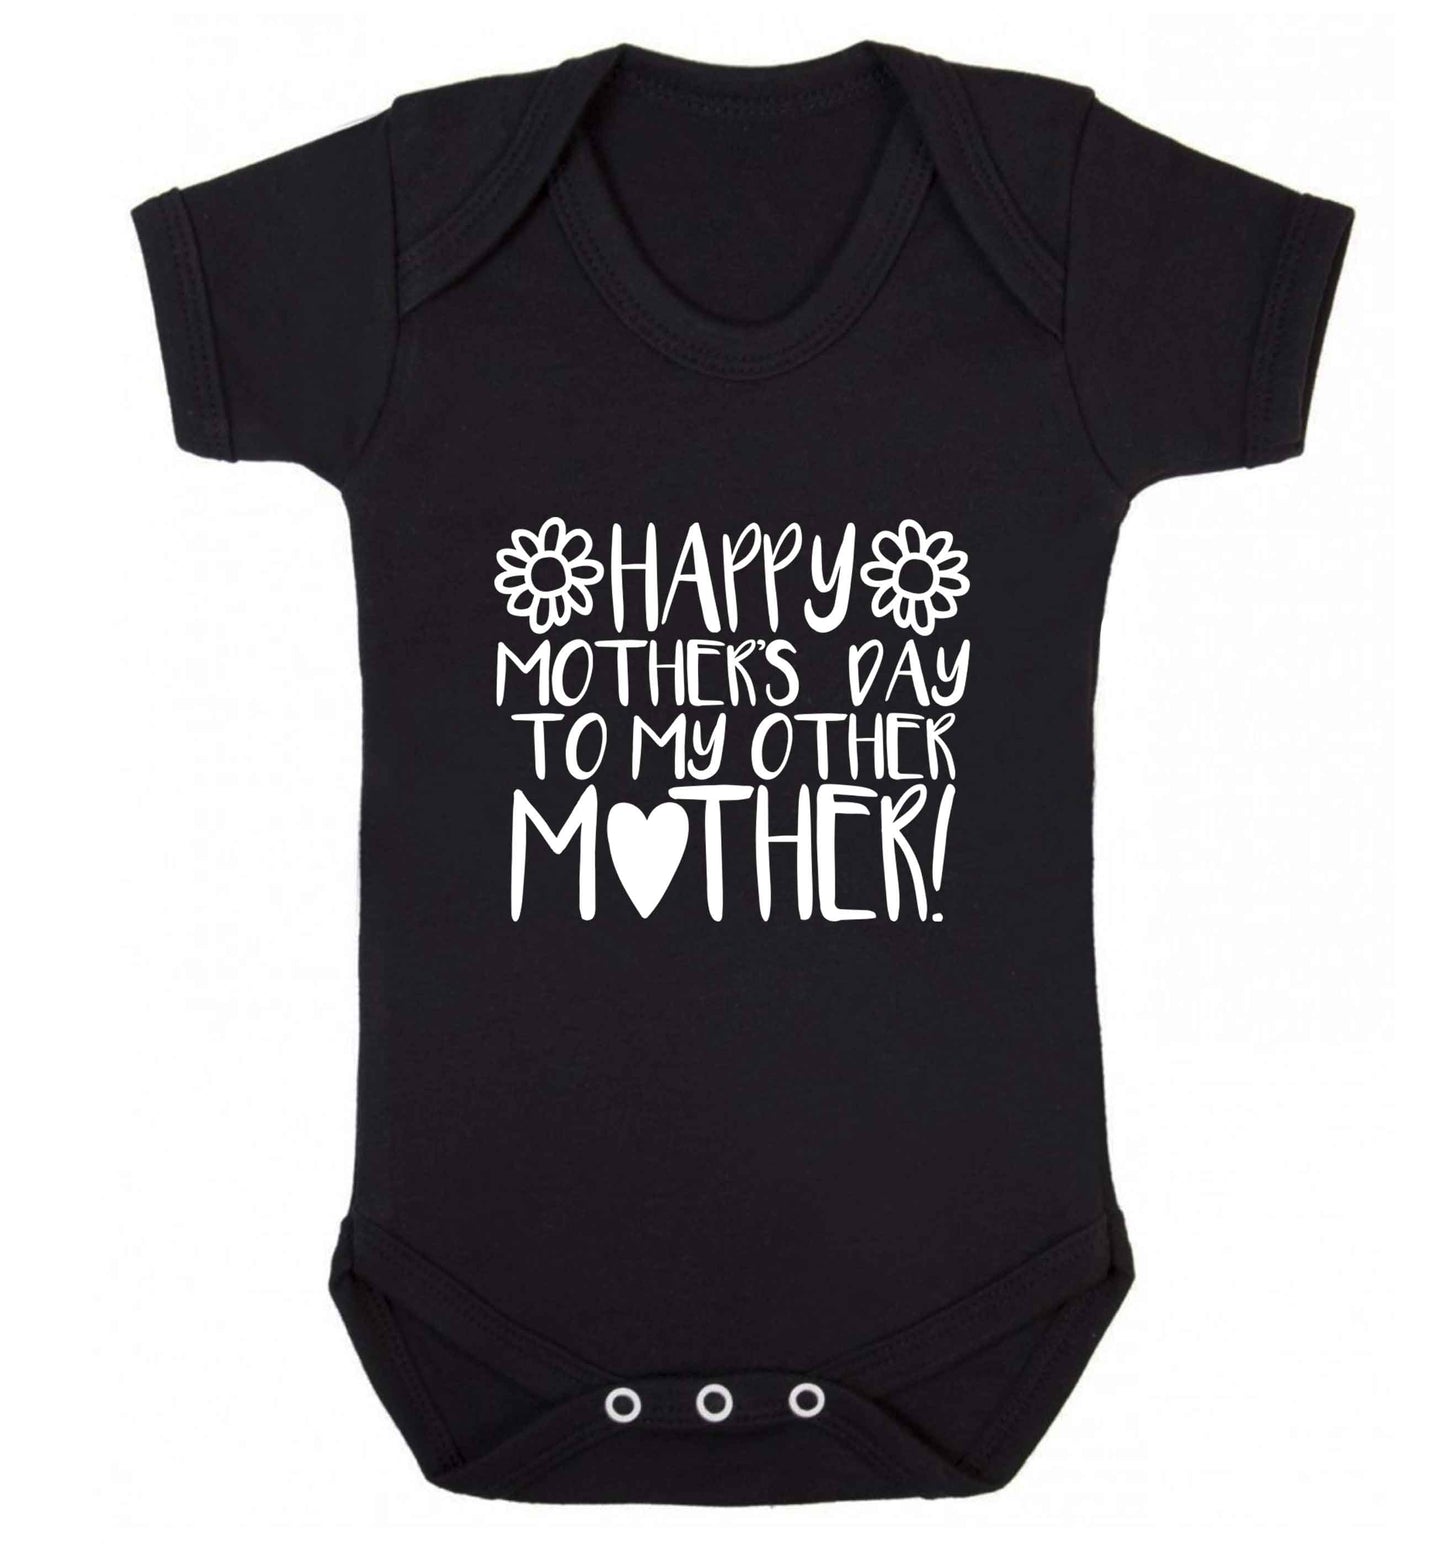 Happy mother's day to my other mother baby vest black 18-24 months